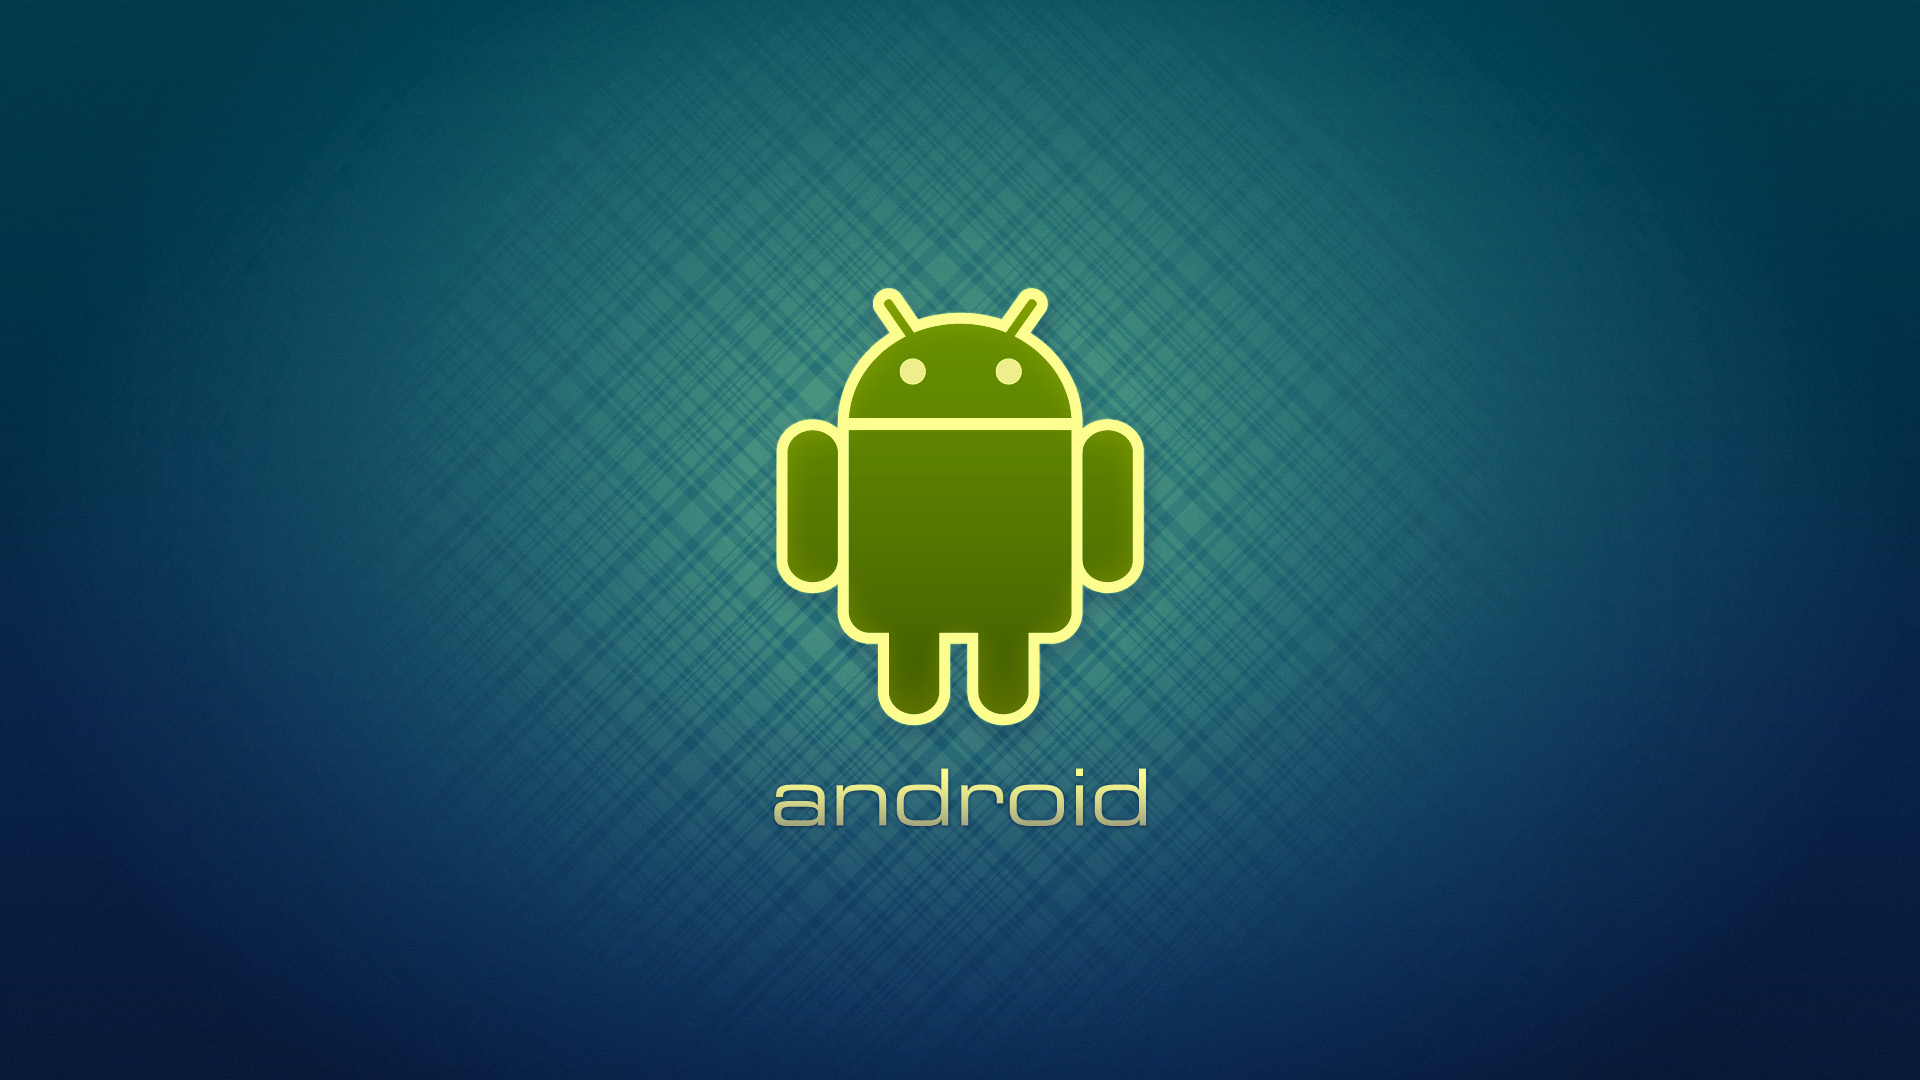 Android / 안드로이드